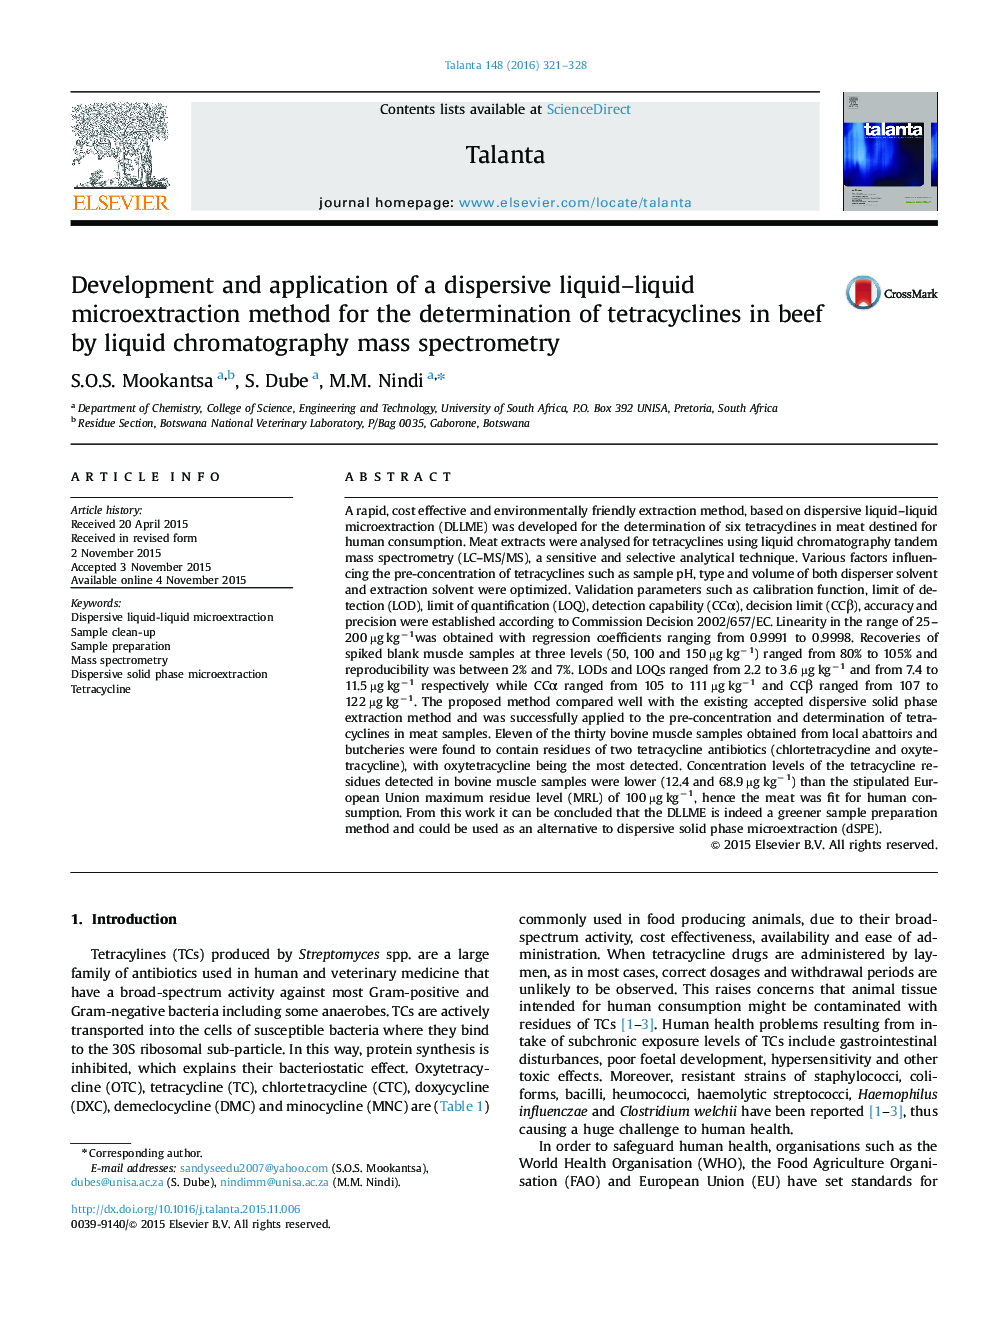 Development and application of a dispersive liquid-liquid microextraction method for the determination of tetracyclines in beef by liquid chromatography mass spectrometry